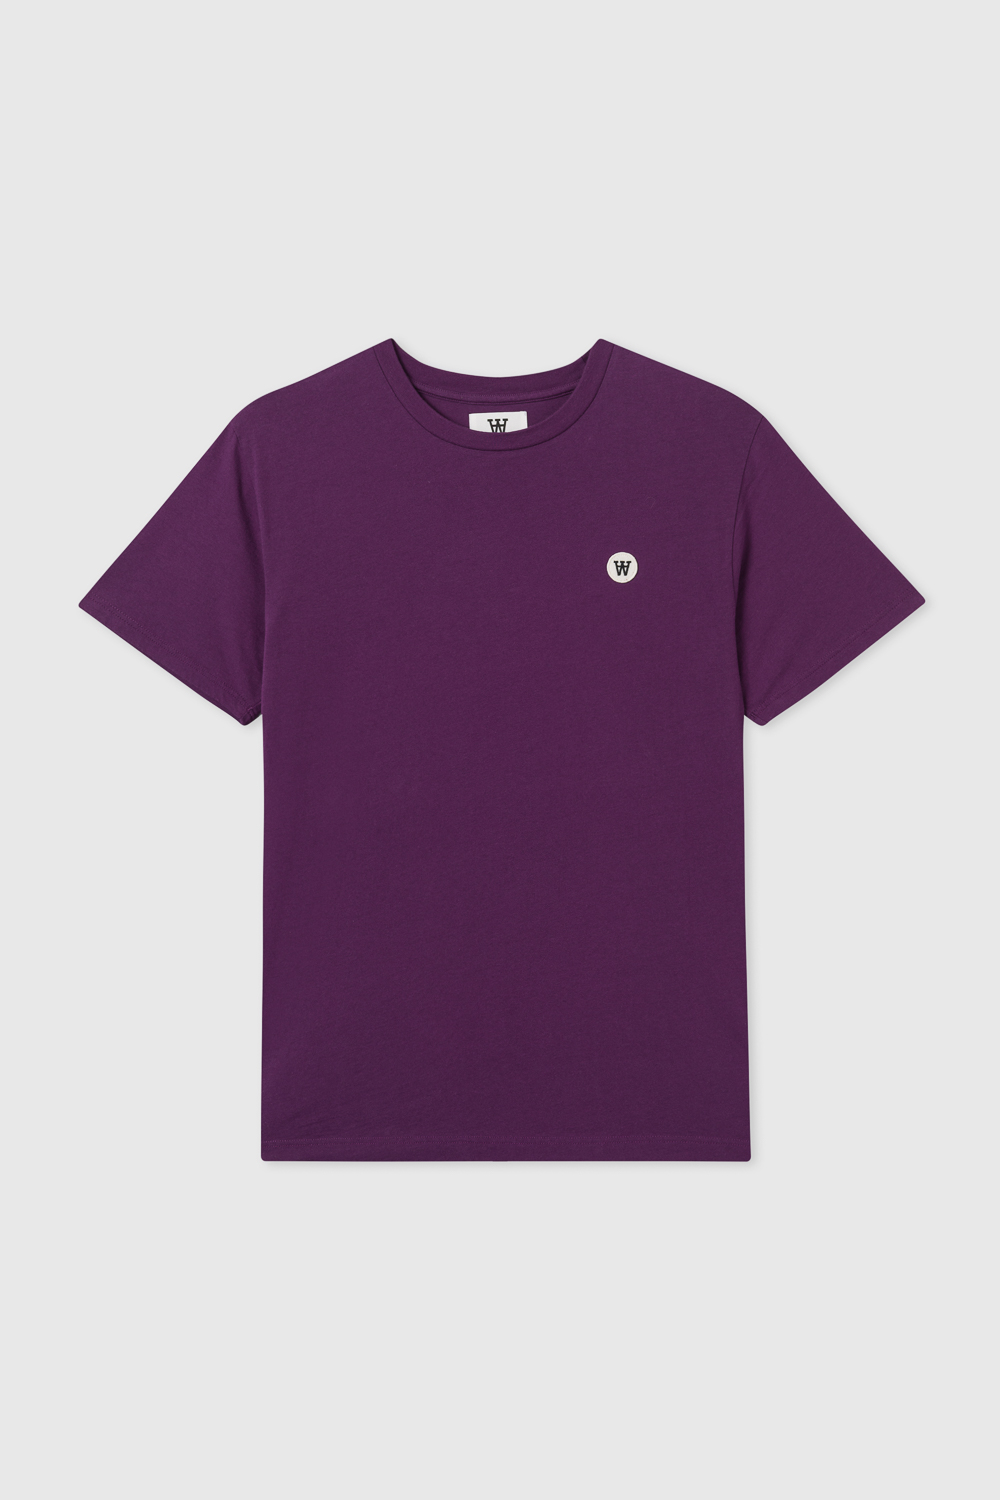 Double A by Wood Wood Ace T-shirt Aubergine | WoodWood.com